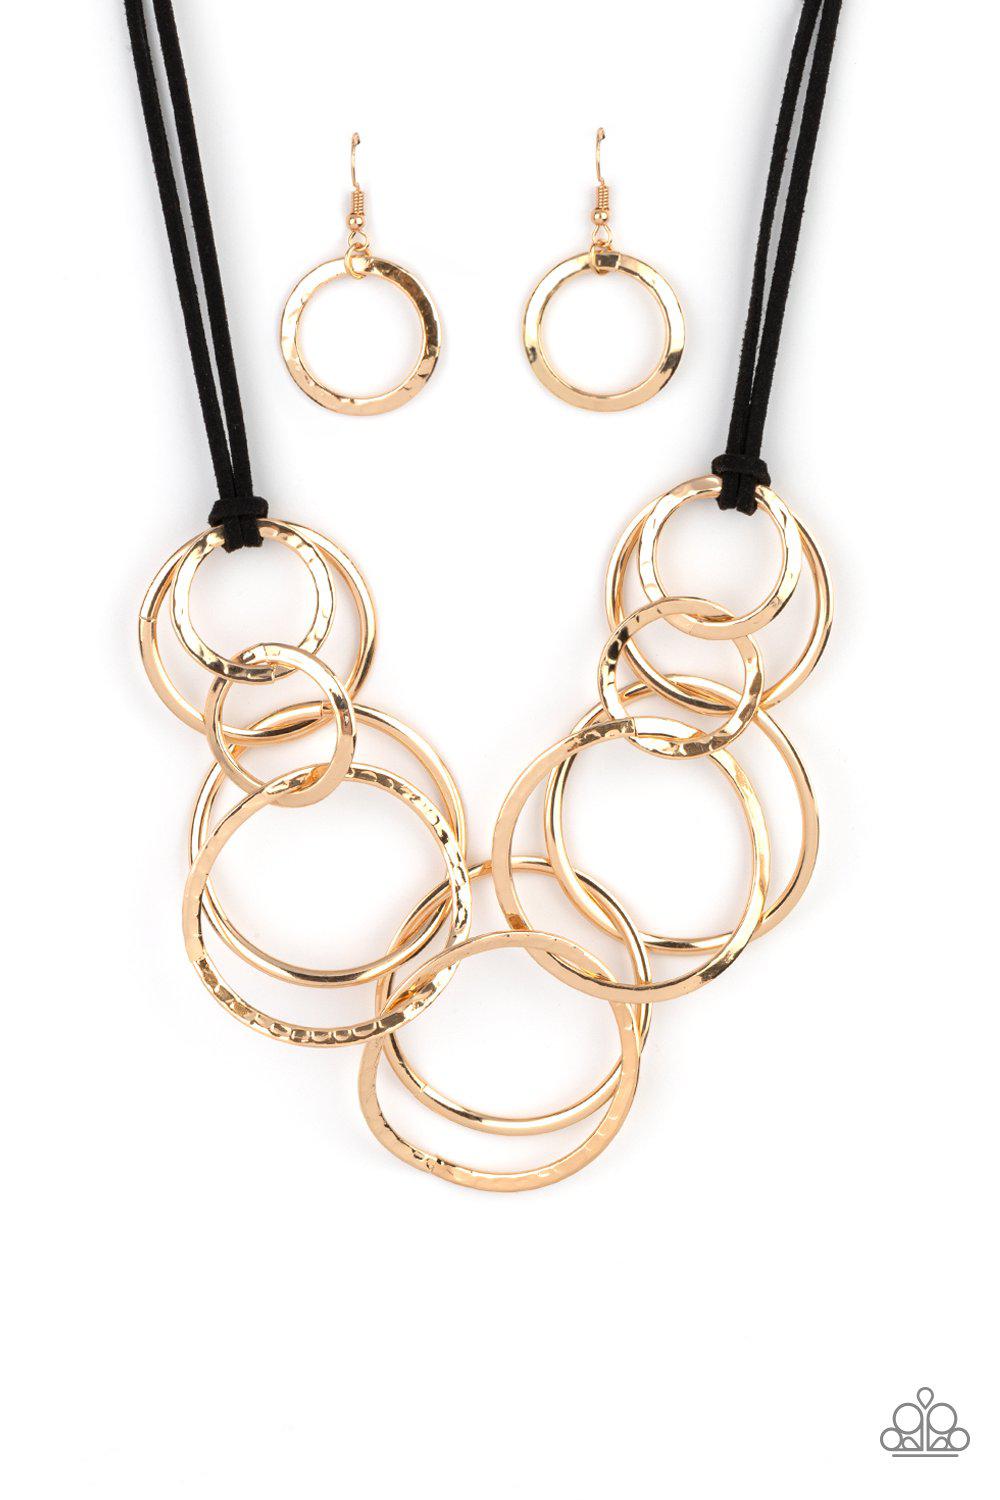 Spiraling Out of COUTURE Gold and Black Suede Necklace - Paparazzi Accessories 2021 Convention Exclusive- lightbox - CarasShop.com - $5 Jewelry by Cara Jewels